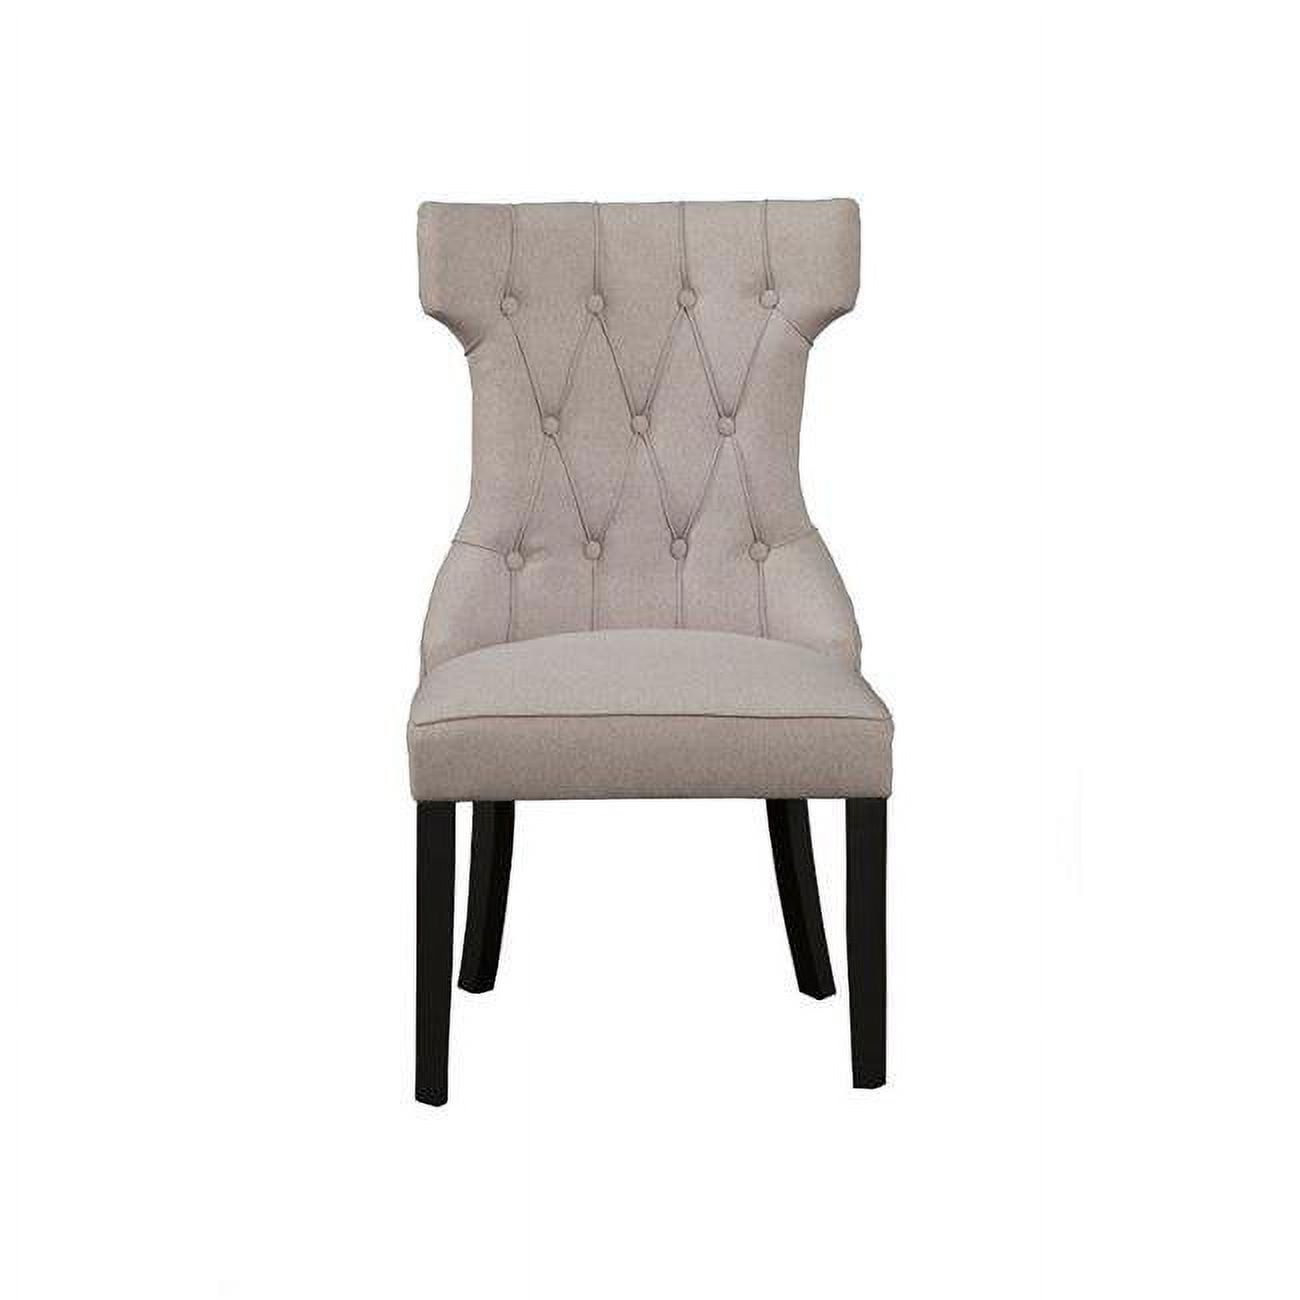 Bm171969 41 X 22 X 26.5 In. Upholstered Button Tufted Side Chairs With Wooden Base, Gray - Set Of 2